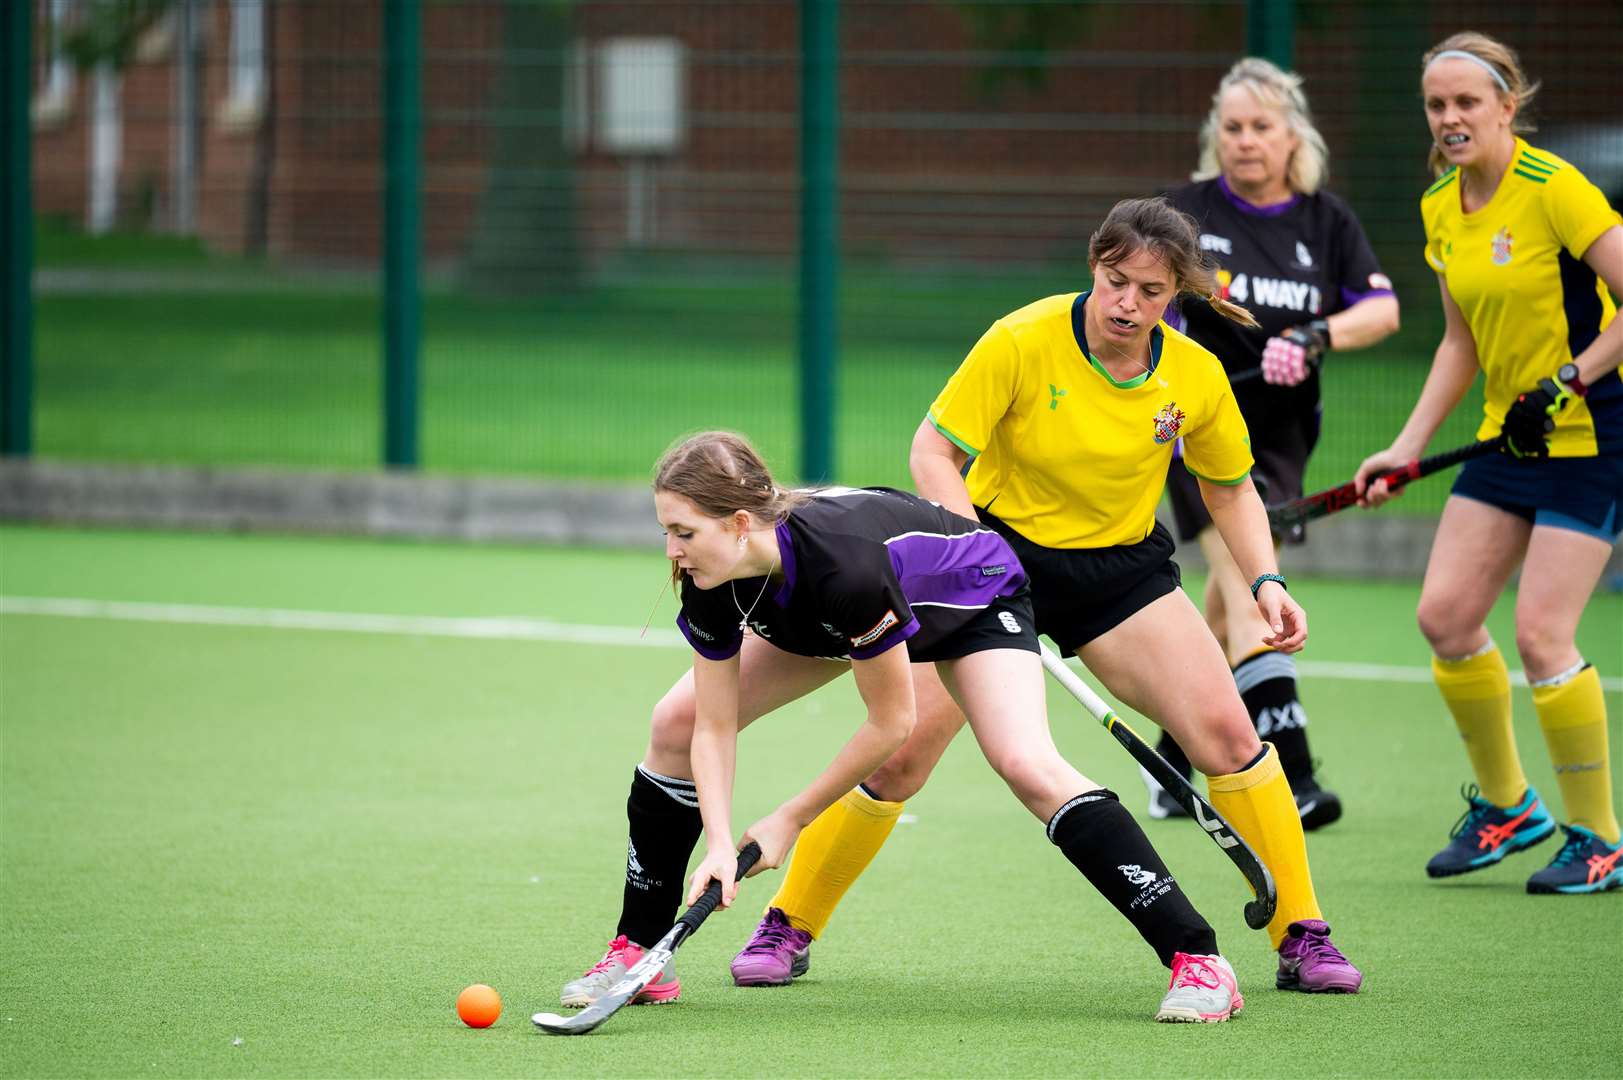 Action between Pelicans Ladies 2nds and Cambridge South at Alive Lynnsport. Picture: Ian Burt